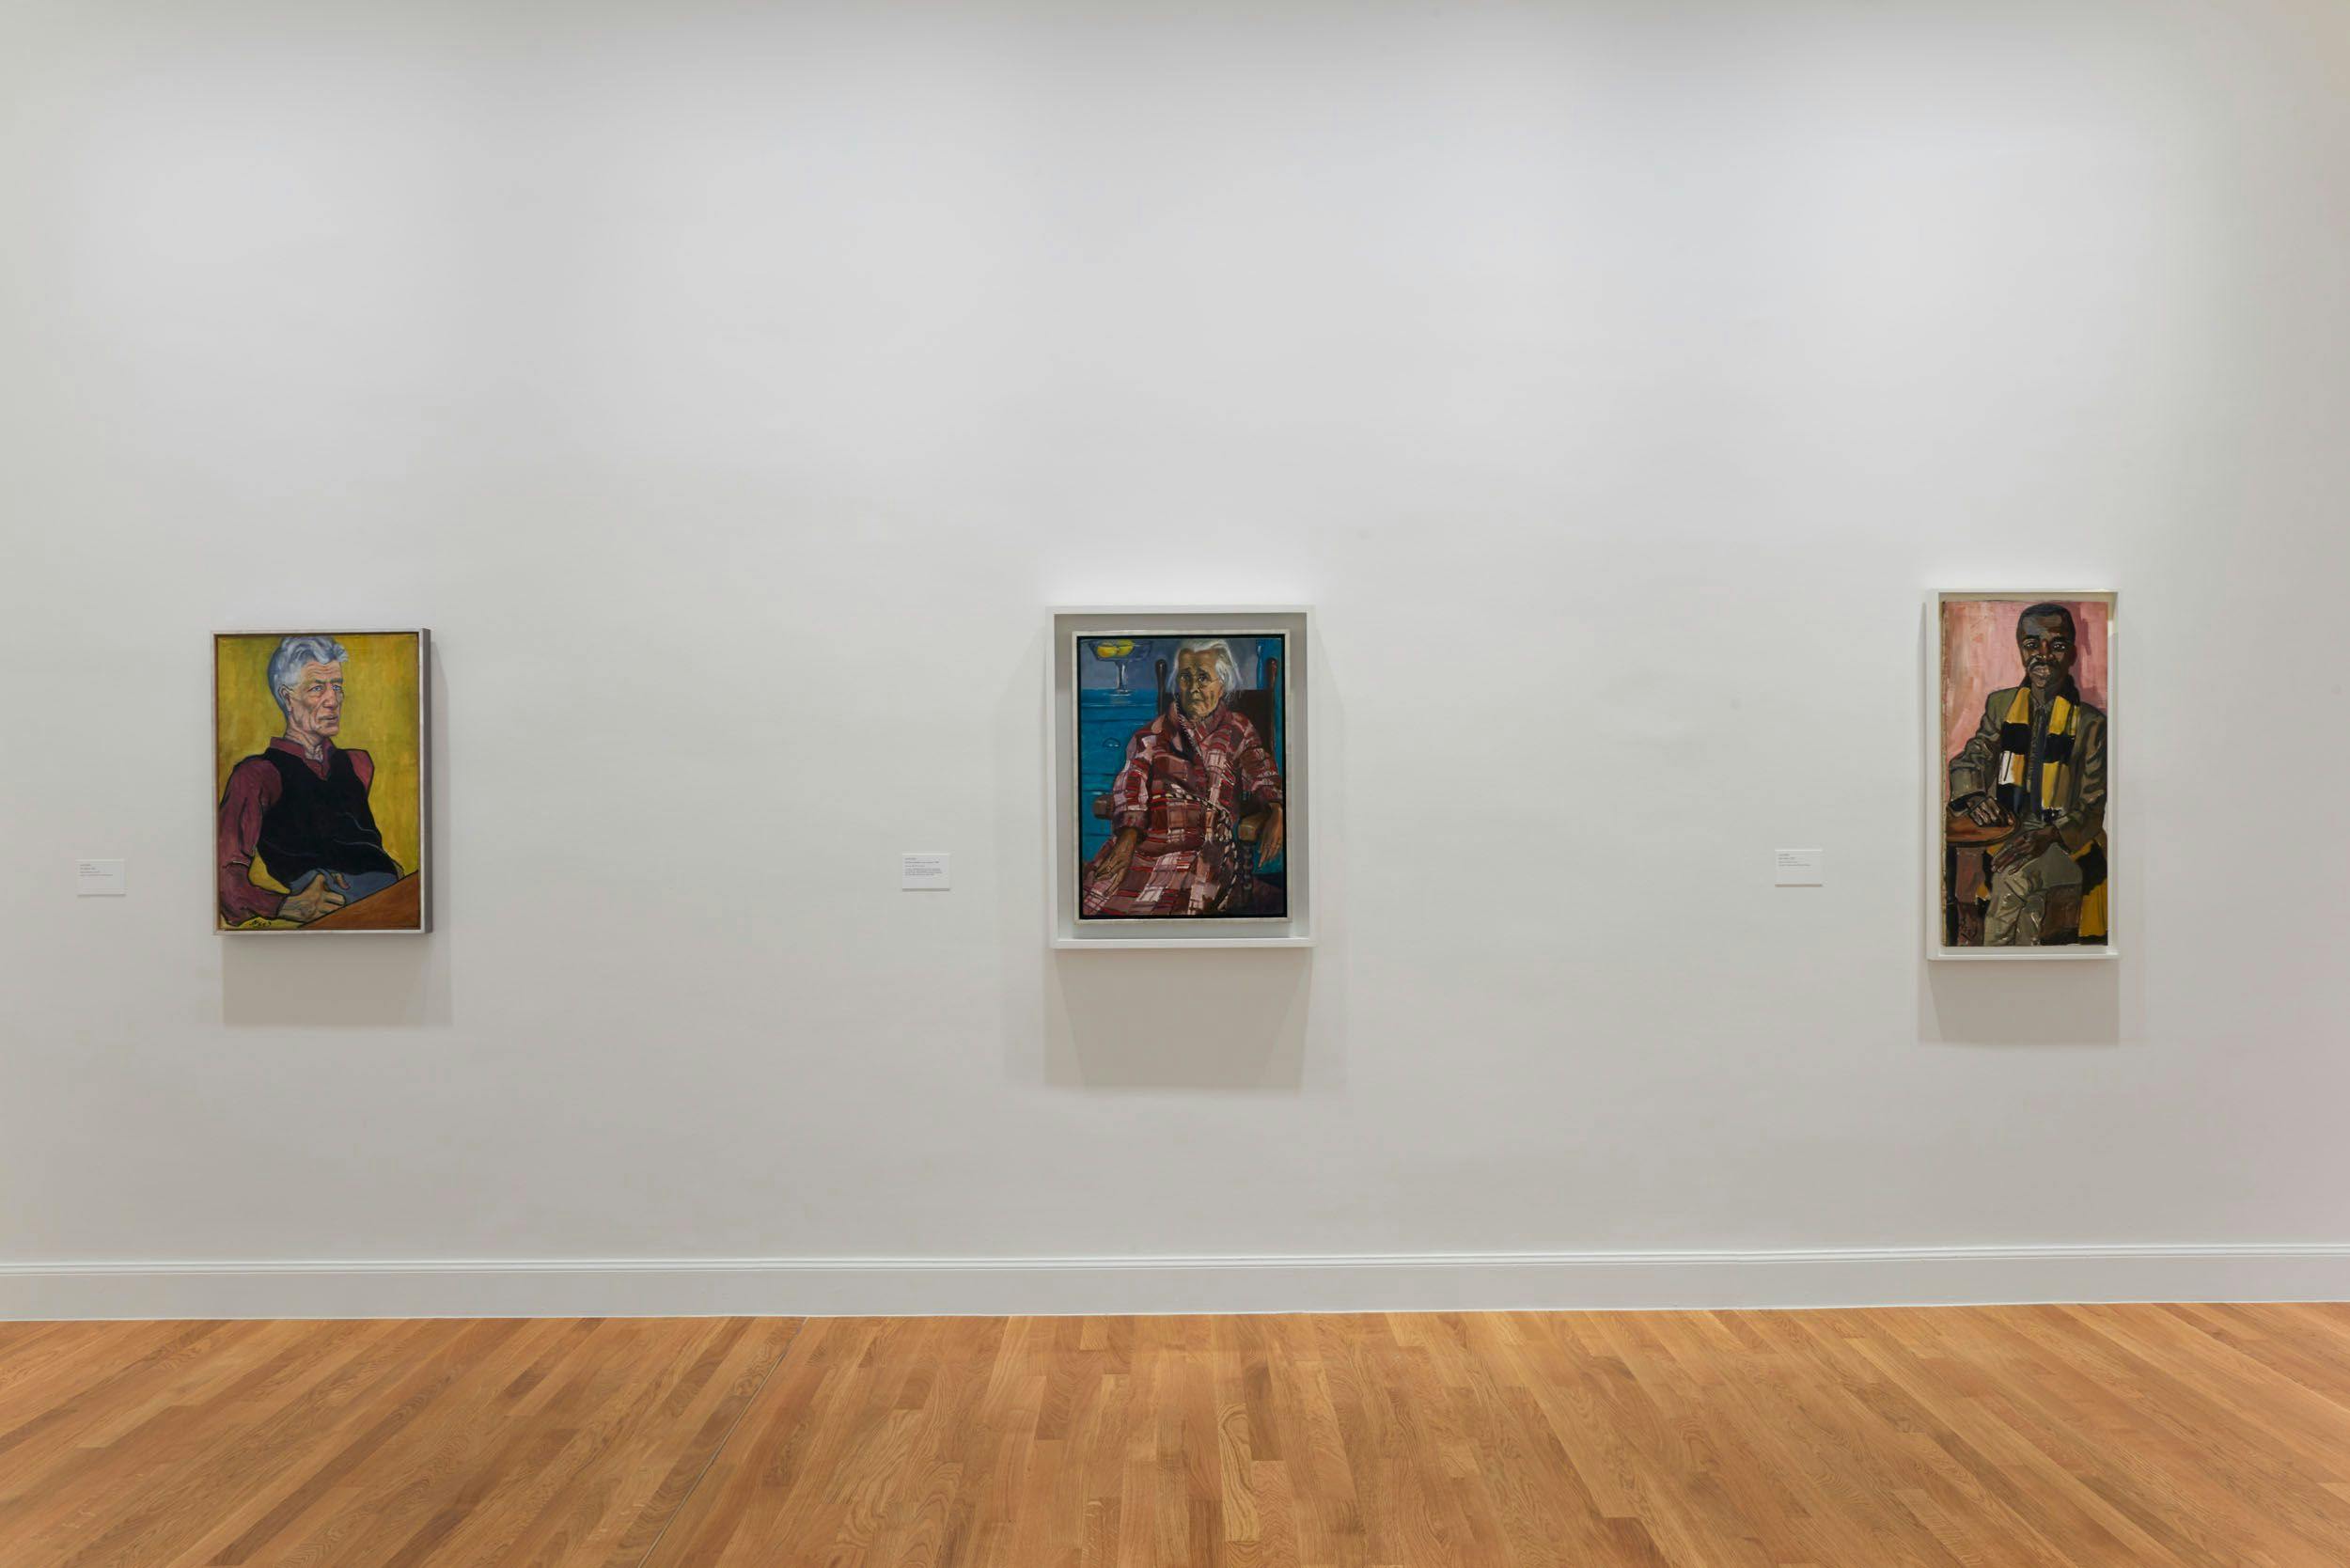 Installation view of¬†the solo exhibition Alice Neel: Painter of Modern Life,¬†at the¬†Fondation Vincent van Gogh in Arles, France, dated 2017.